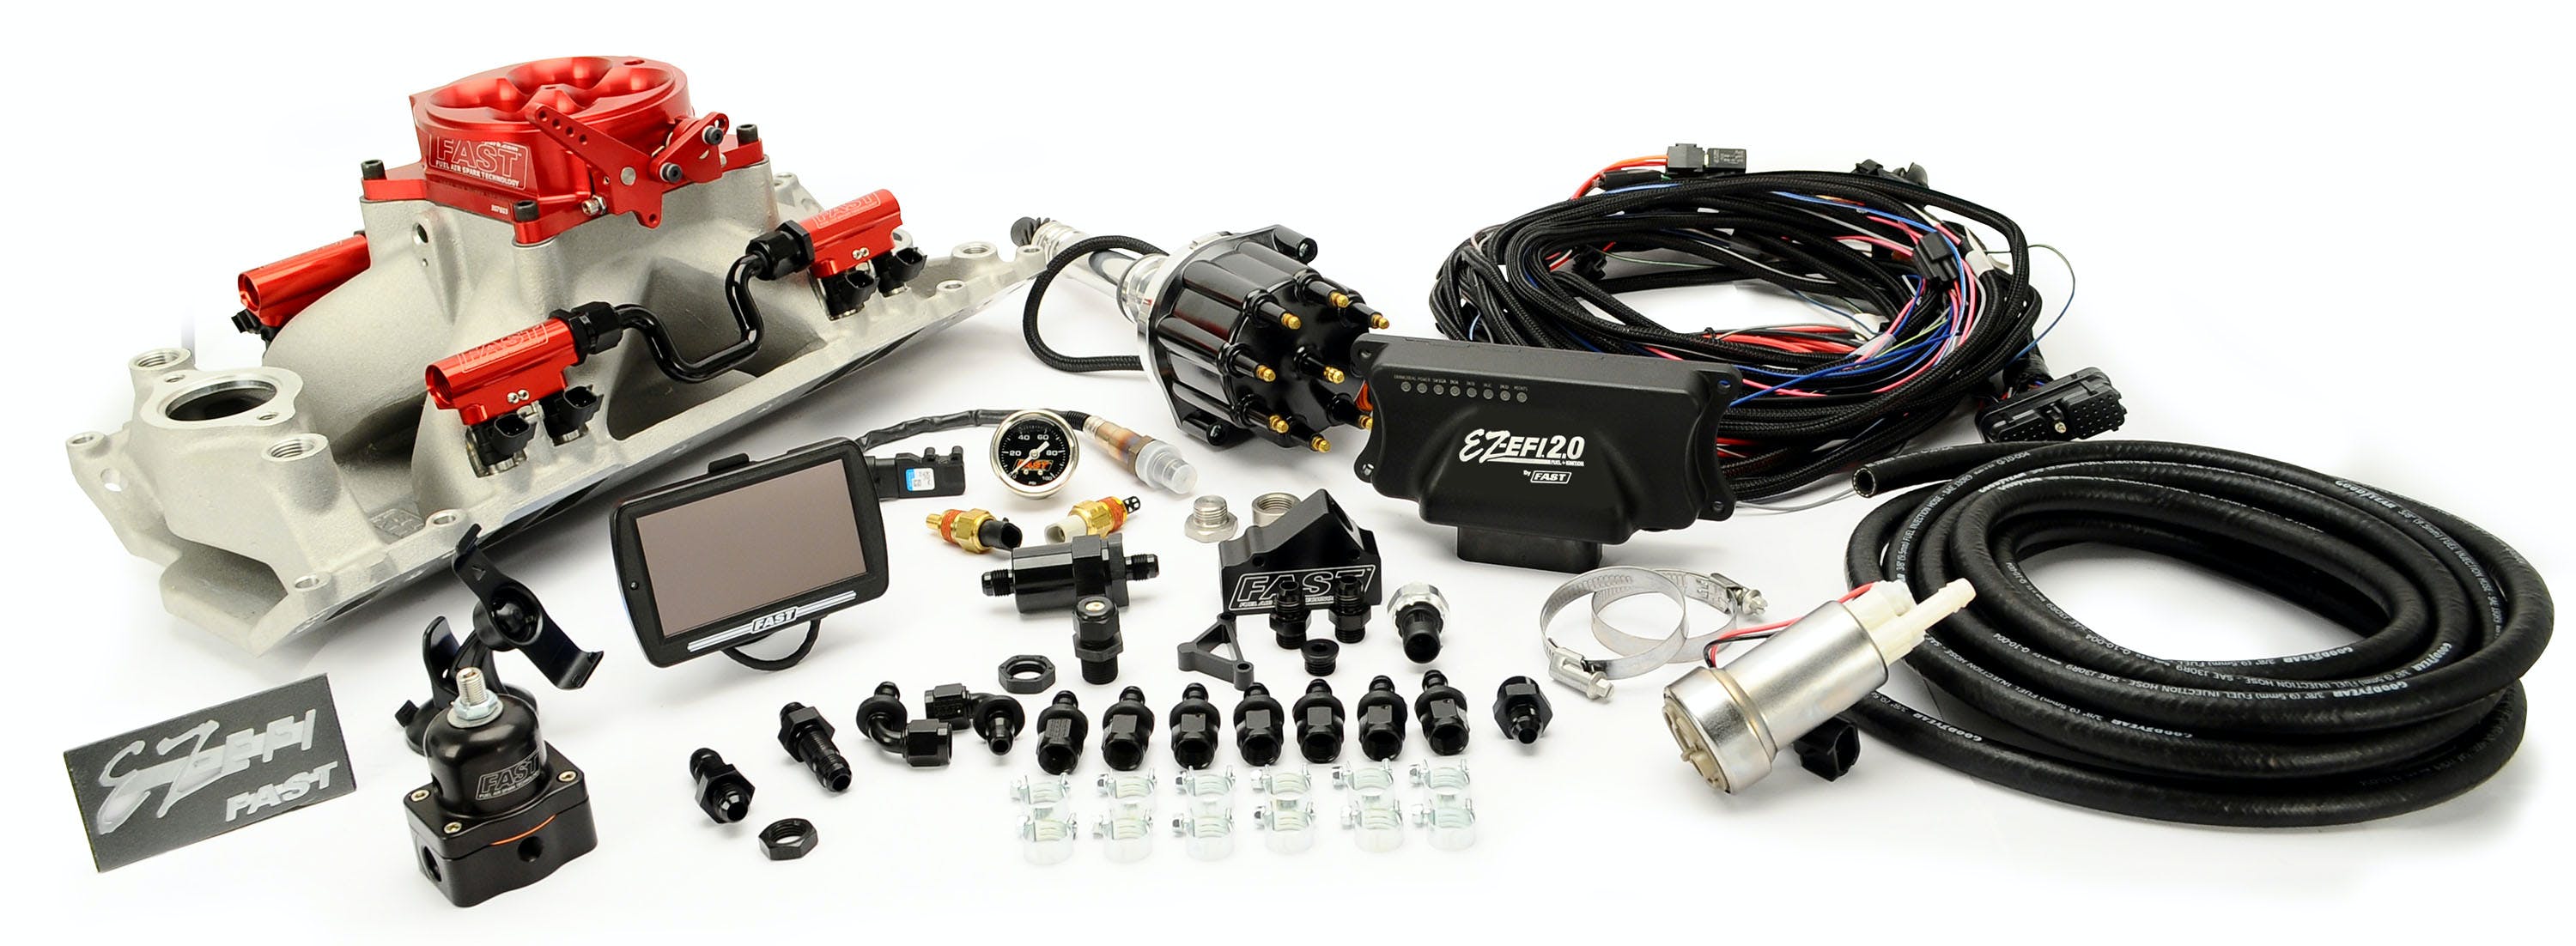 FAST - Fuel Air Spark Technology 30412-10L EZ 2.0 SBC Multiport w/intake, rails, throttle body, distributor and fuel pump